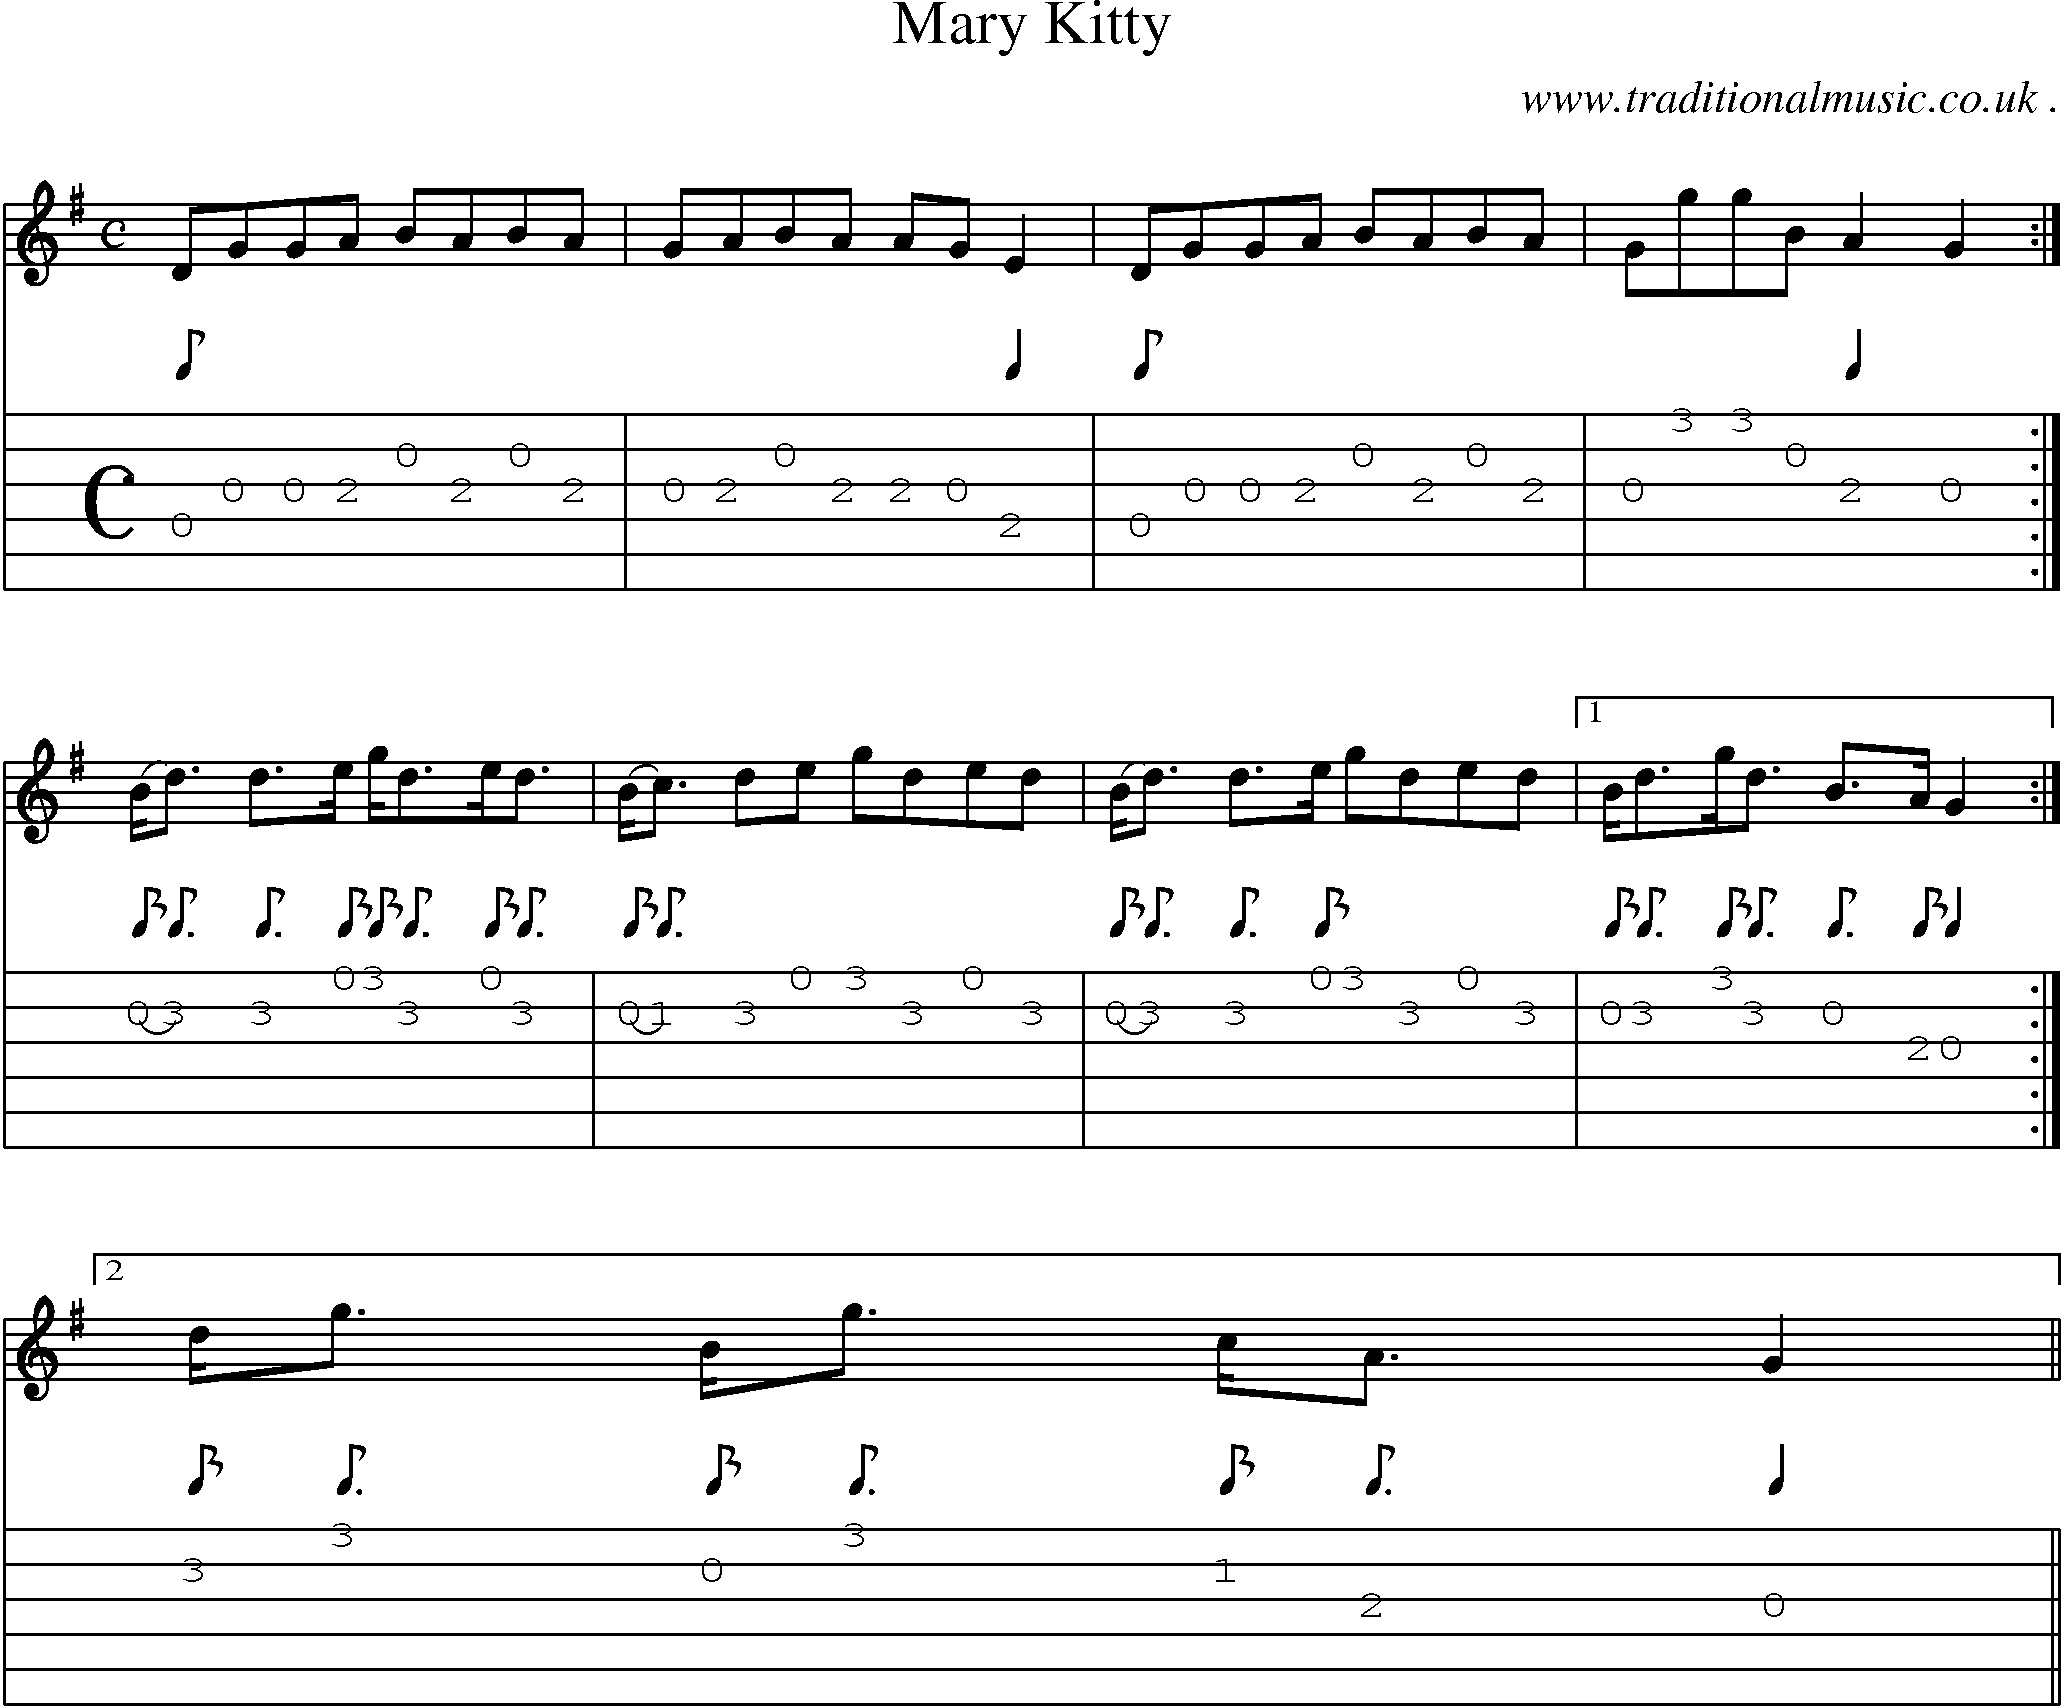 Sheet-music  score, Chords and Guitar Tabs for Mary Kitty